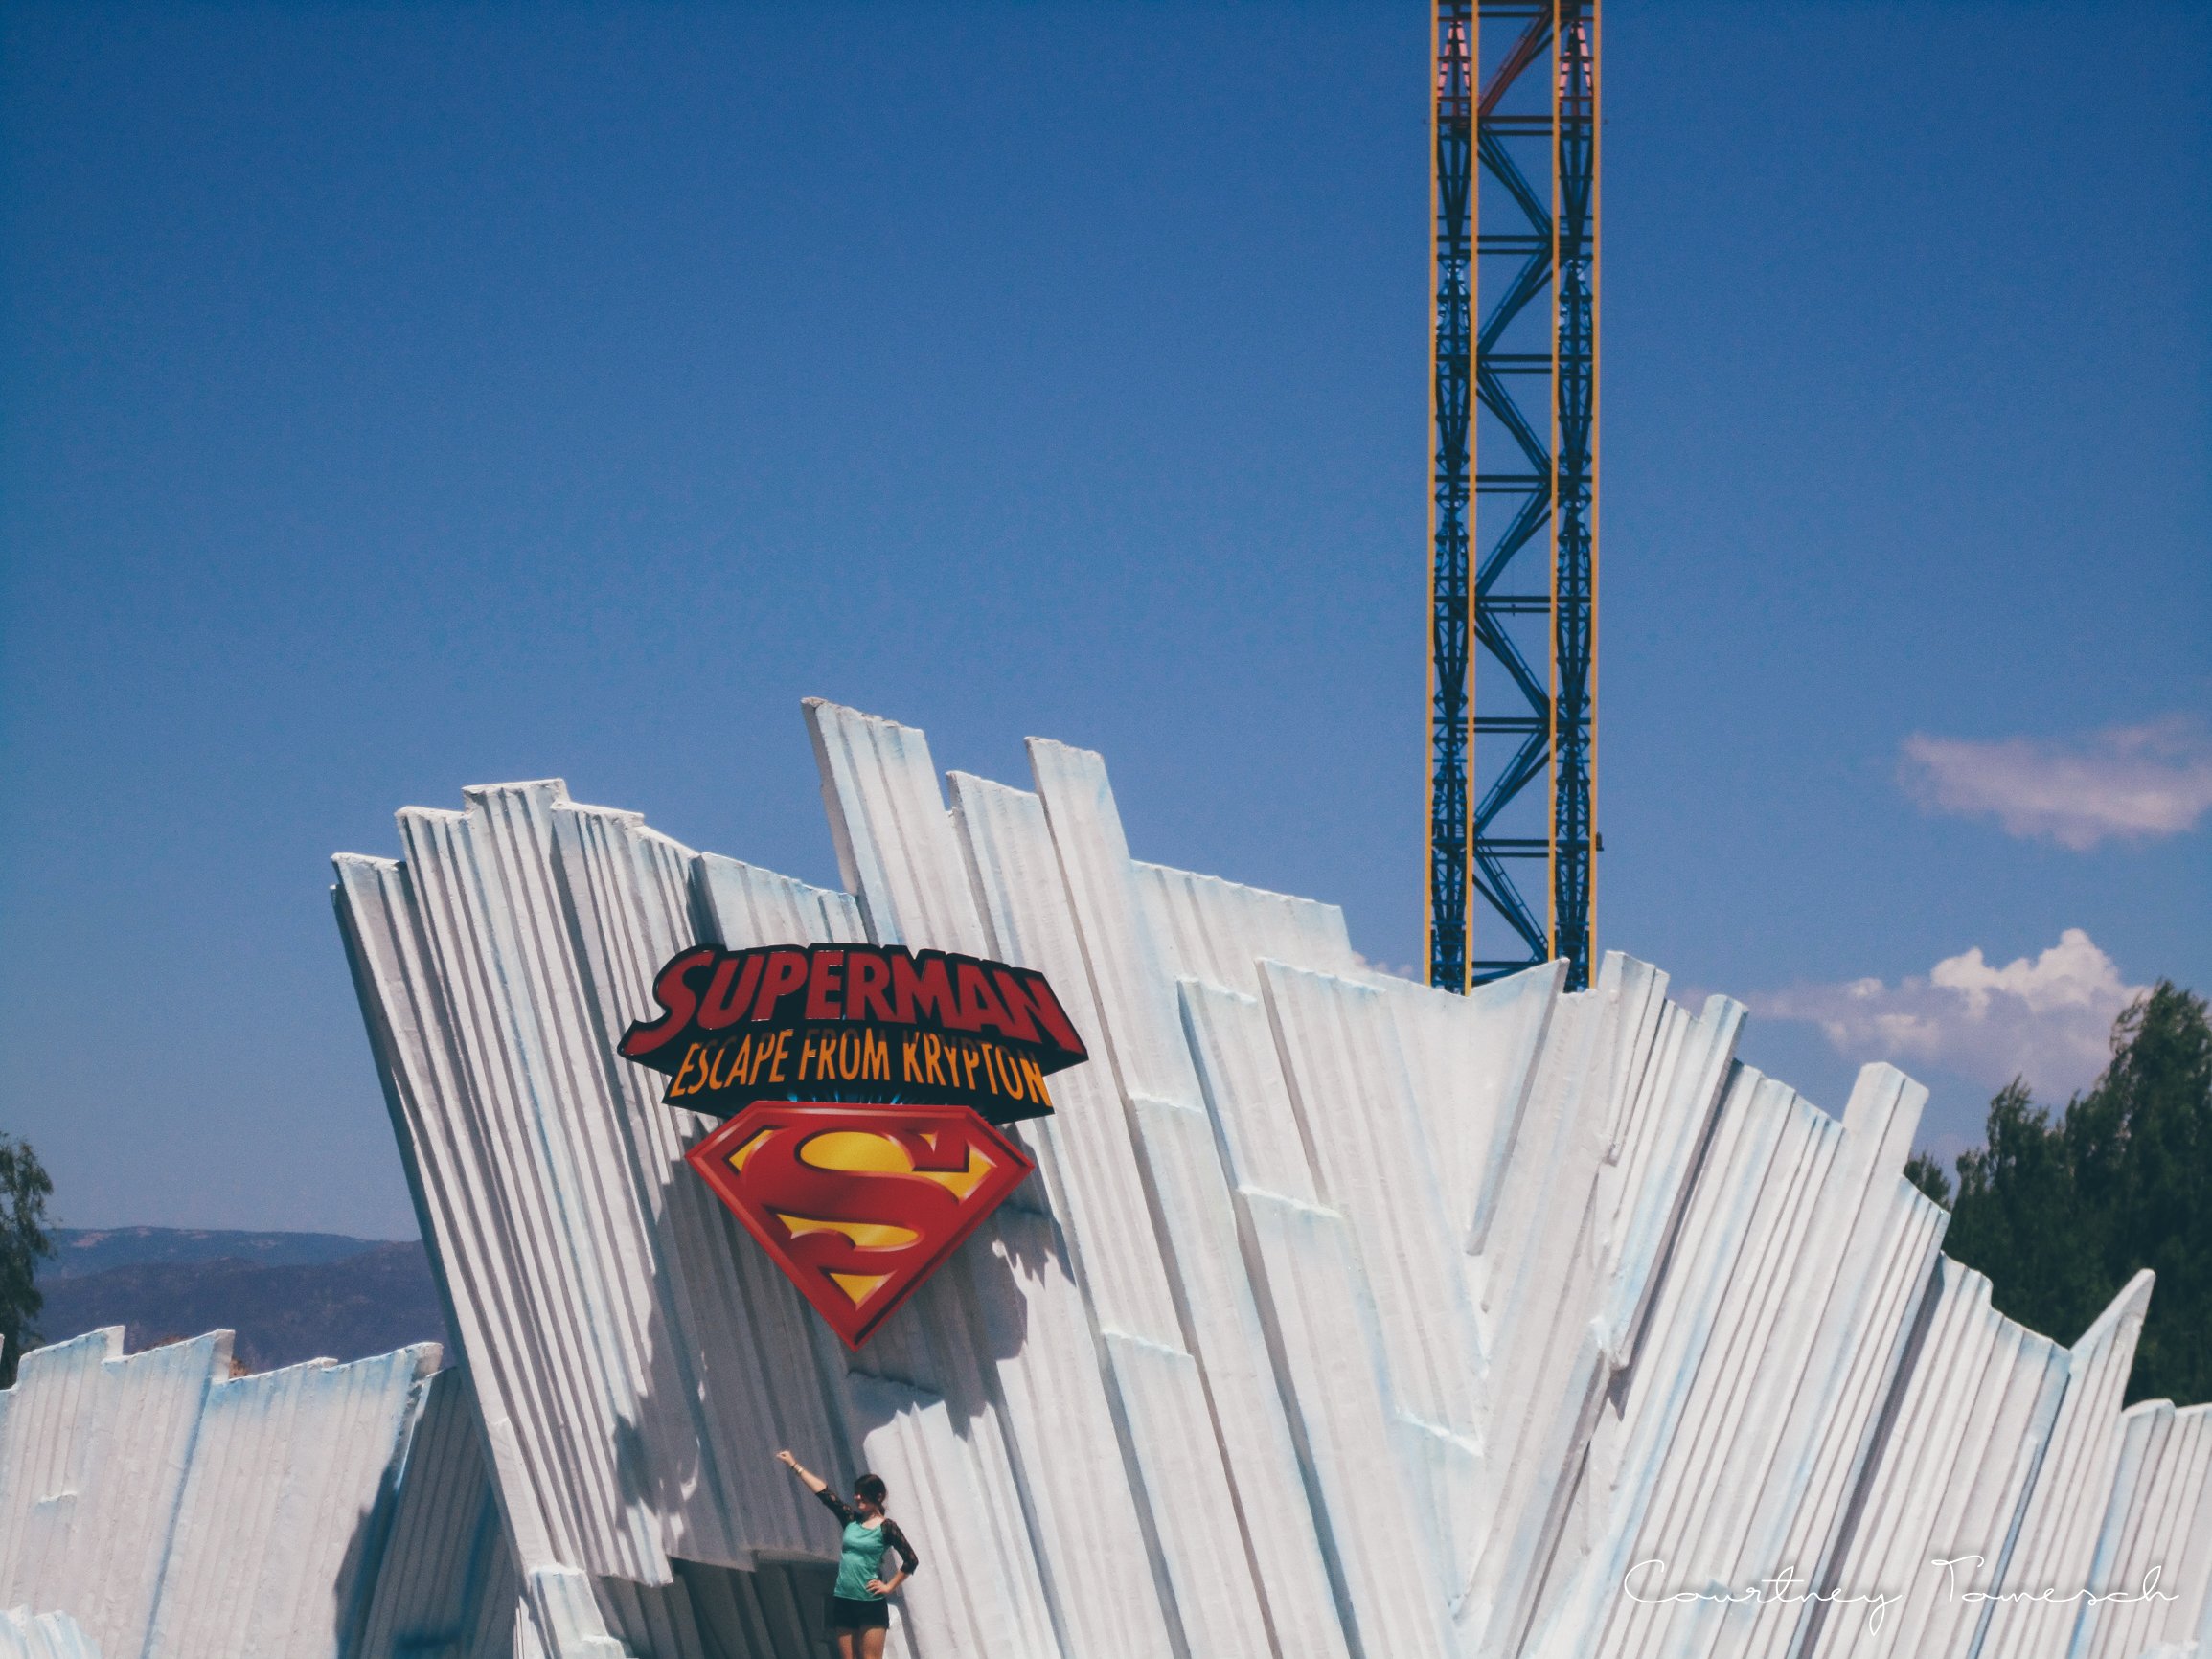 First ride of the day Superman!  I love this ride so amazing!